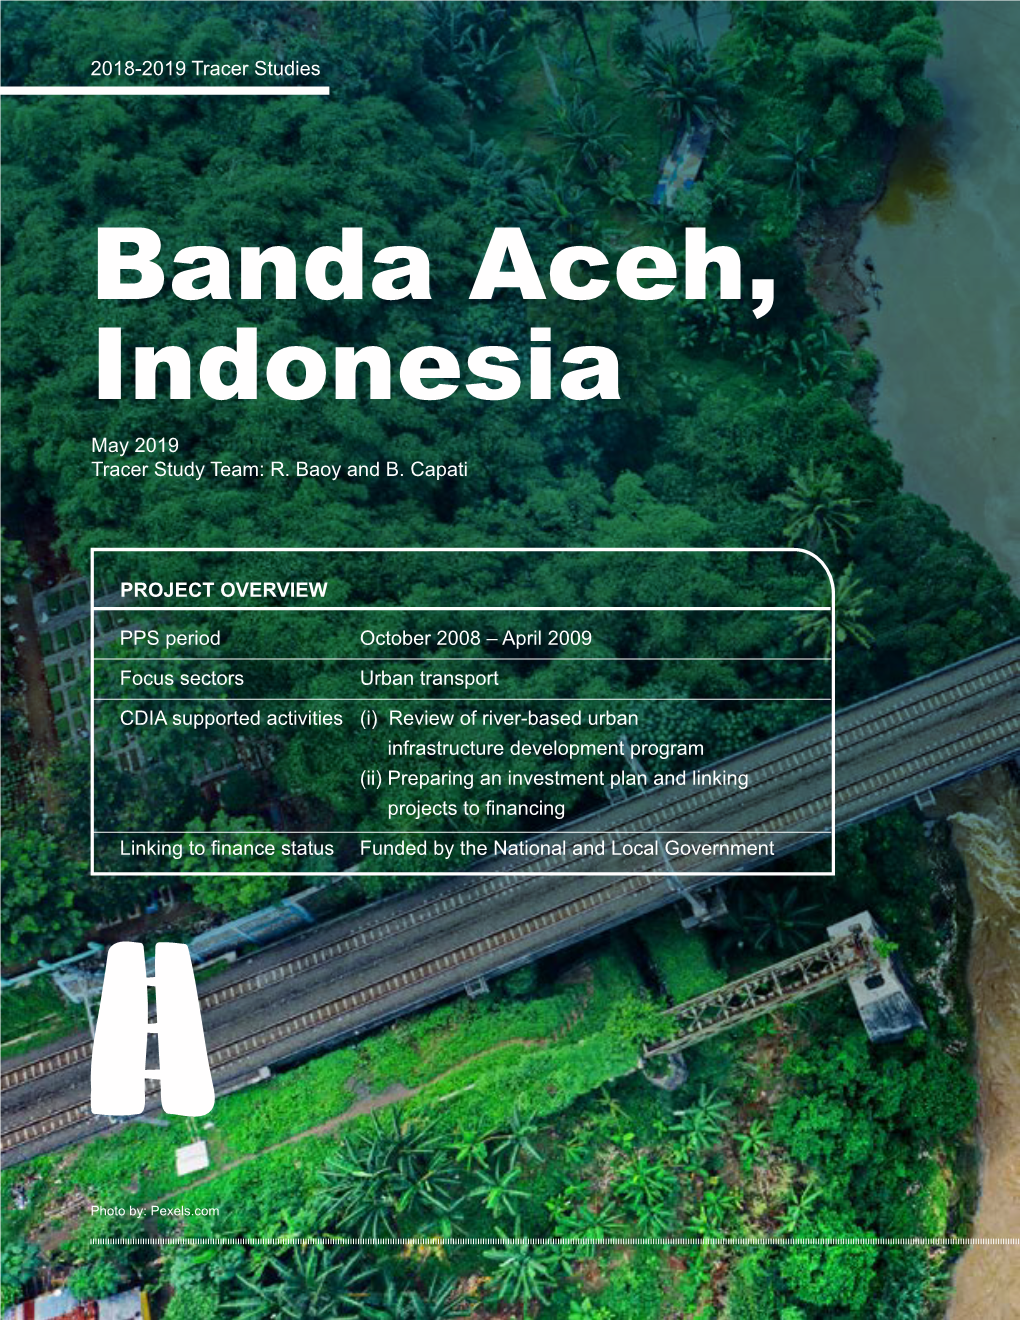 Banda Aceh, Indonesia May 2019 Tracer Study Team: R